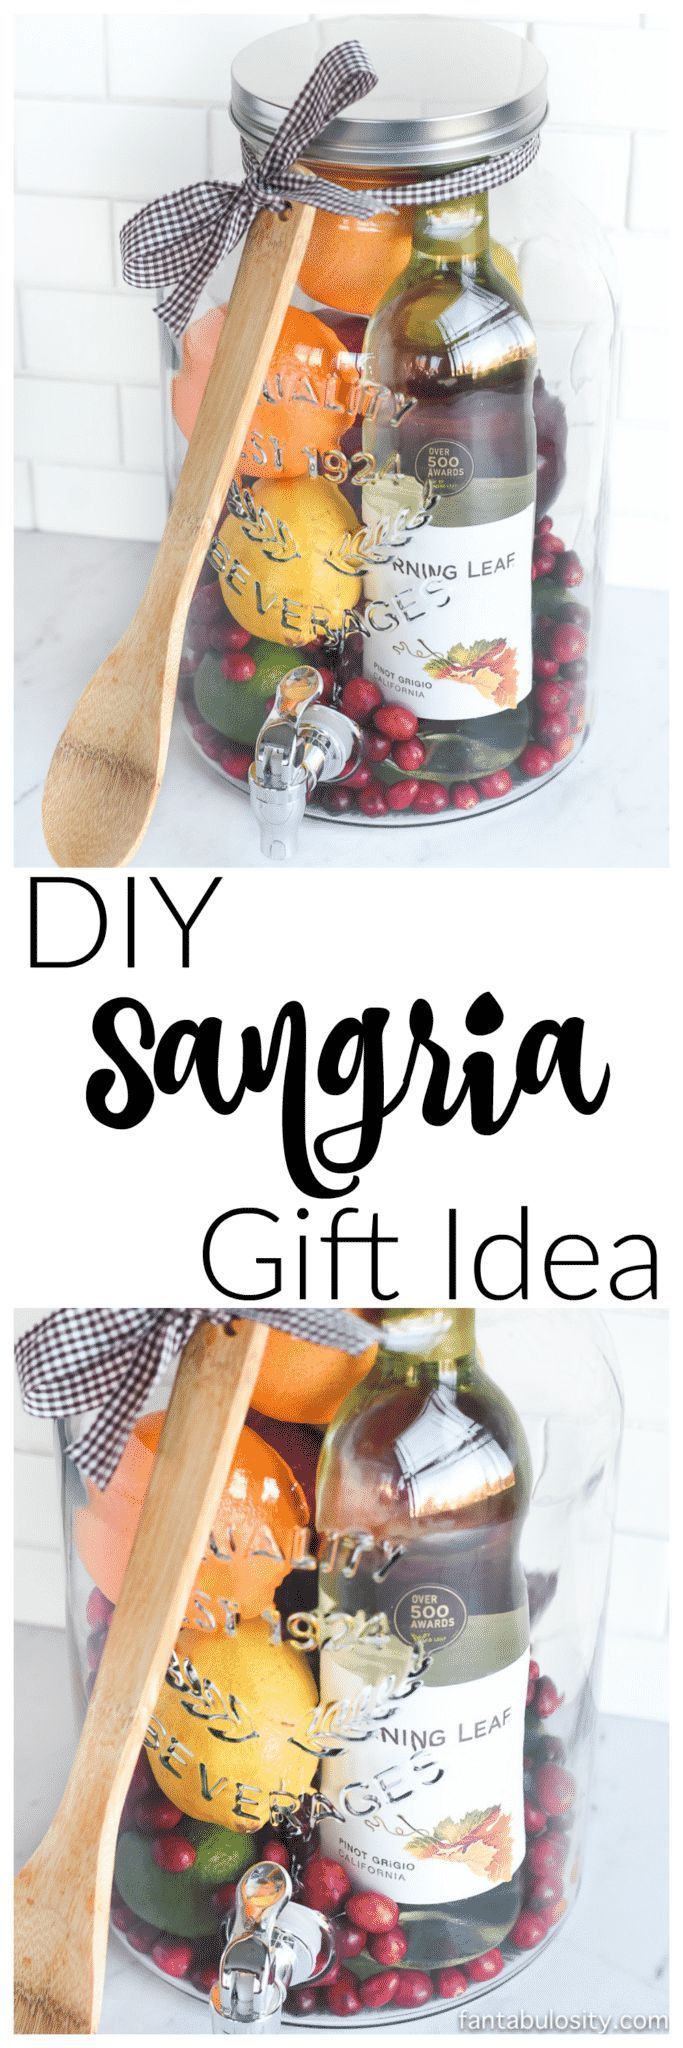 19 diy Gifts for friends ideas